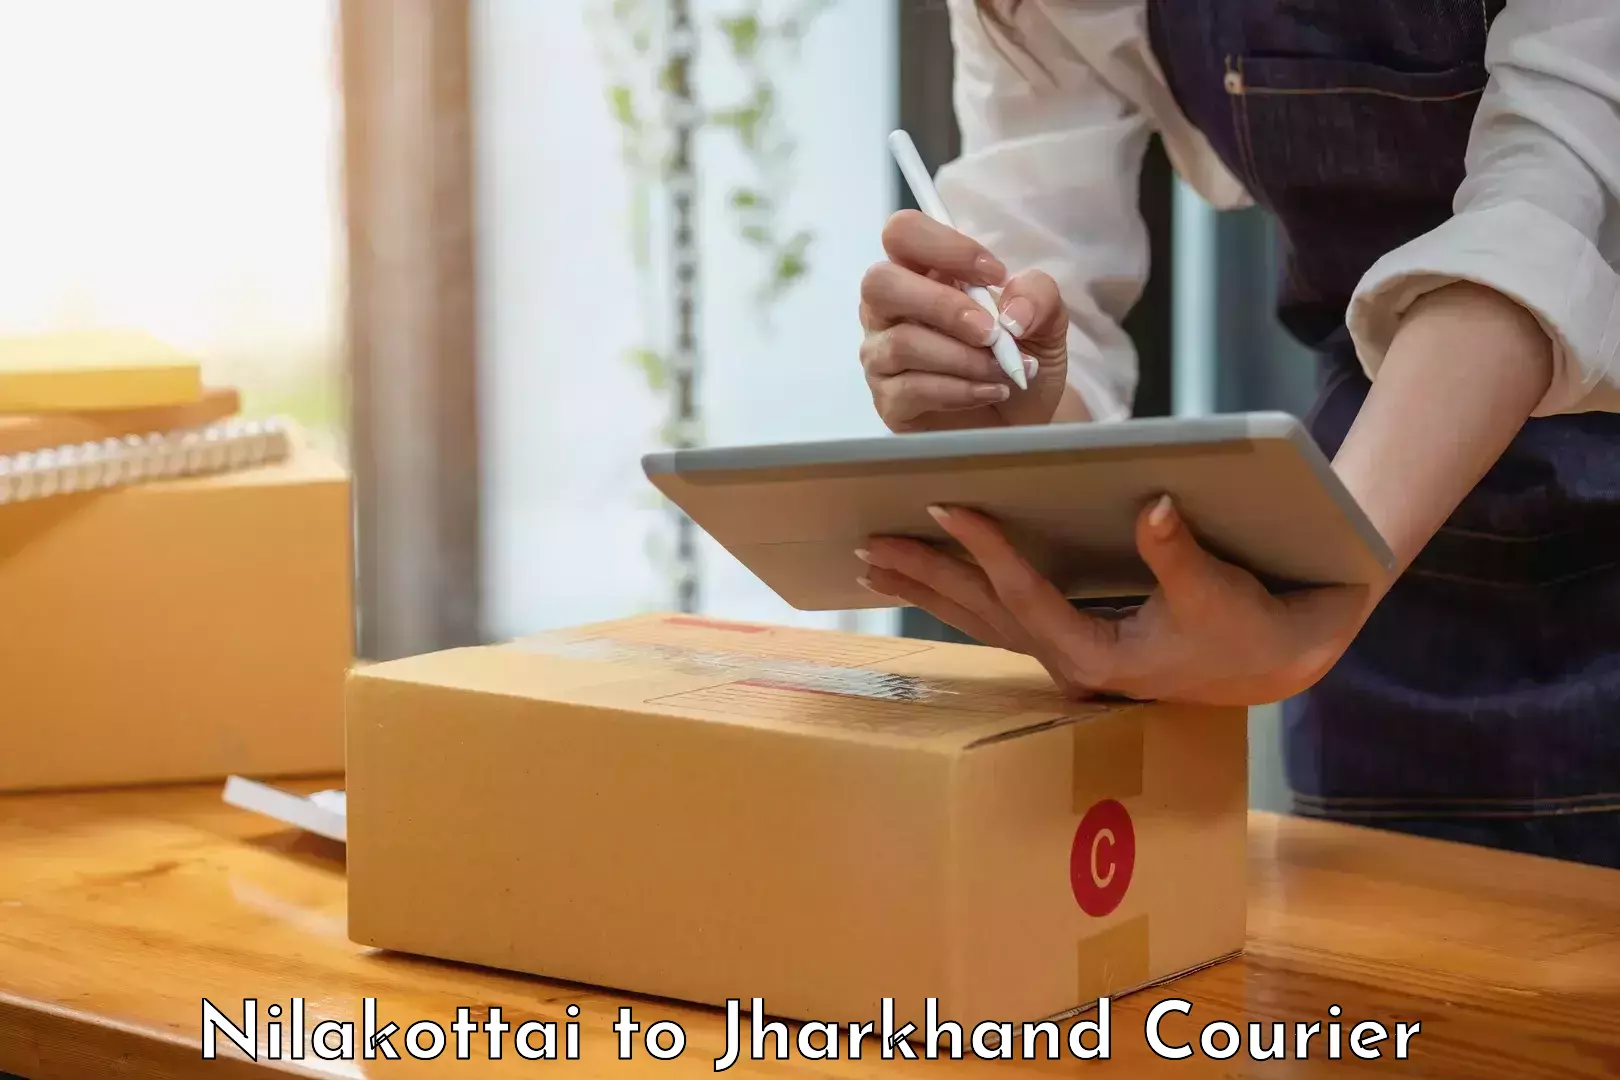 Subscription-based courier Nilakottai to Domchanch